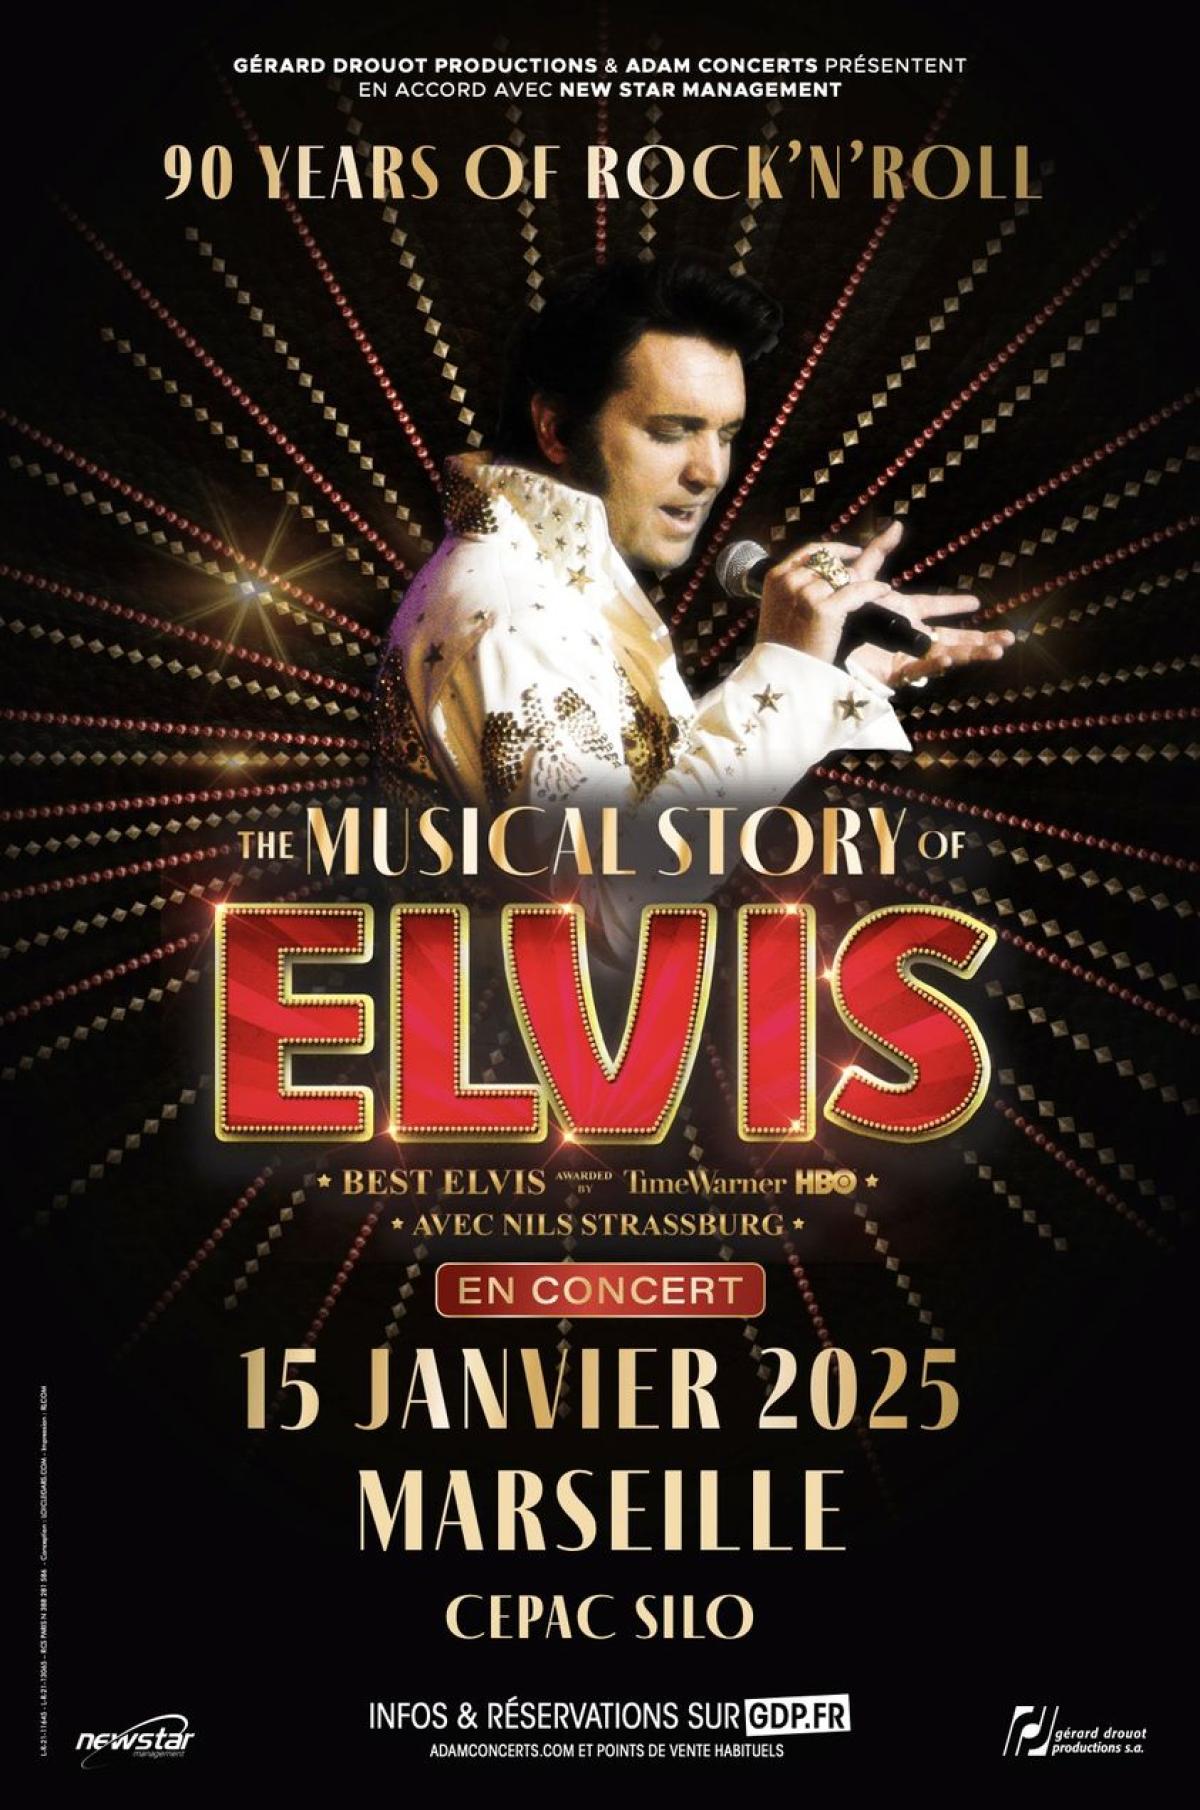 The Musical Story Of Elvis in der Le Silo Tickets